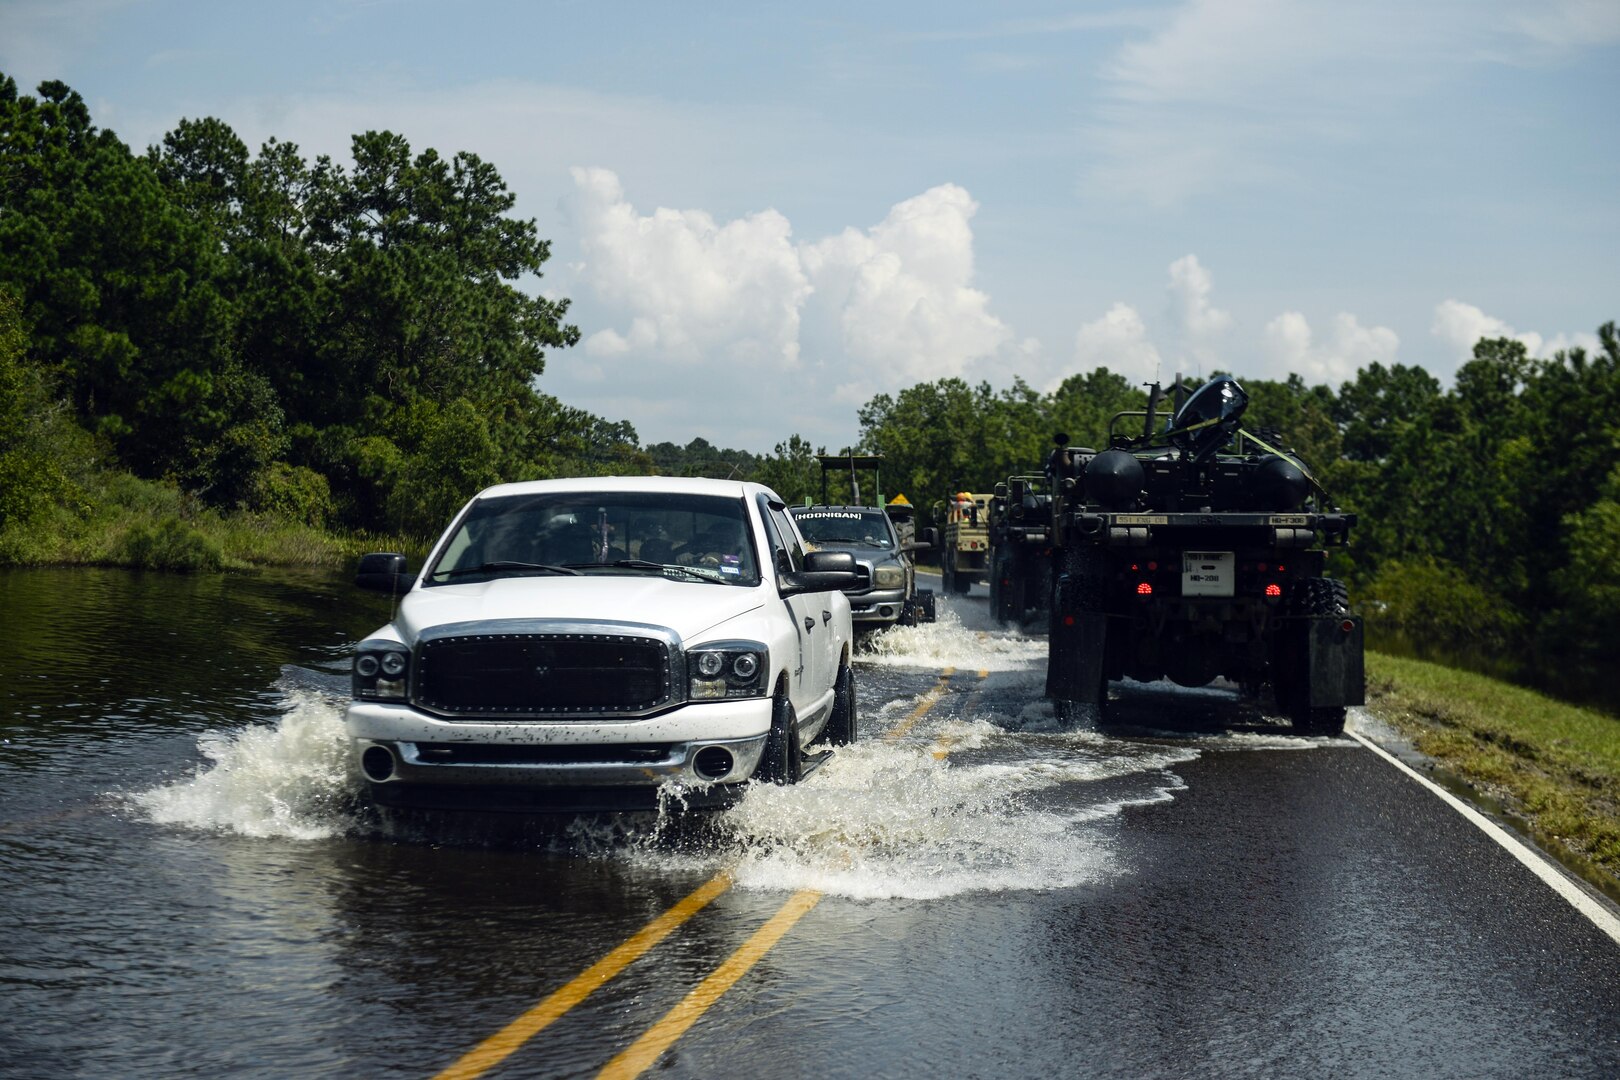 Military vehicles and civilian vehicles drive though a flooded street.